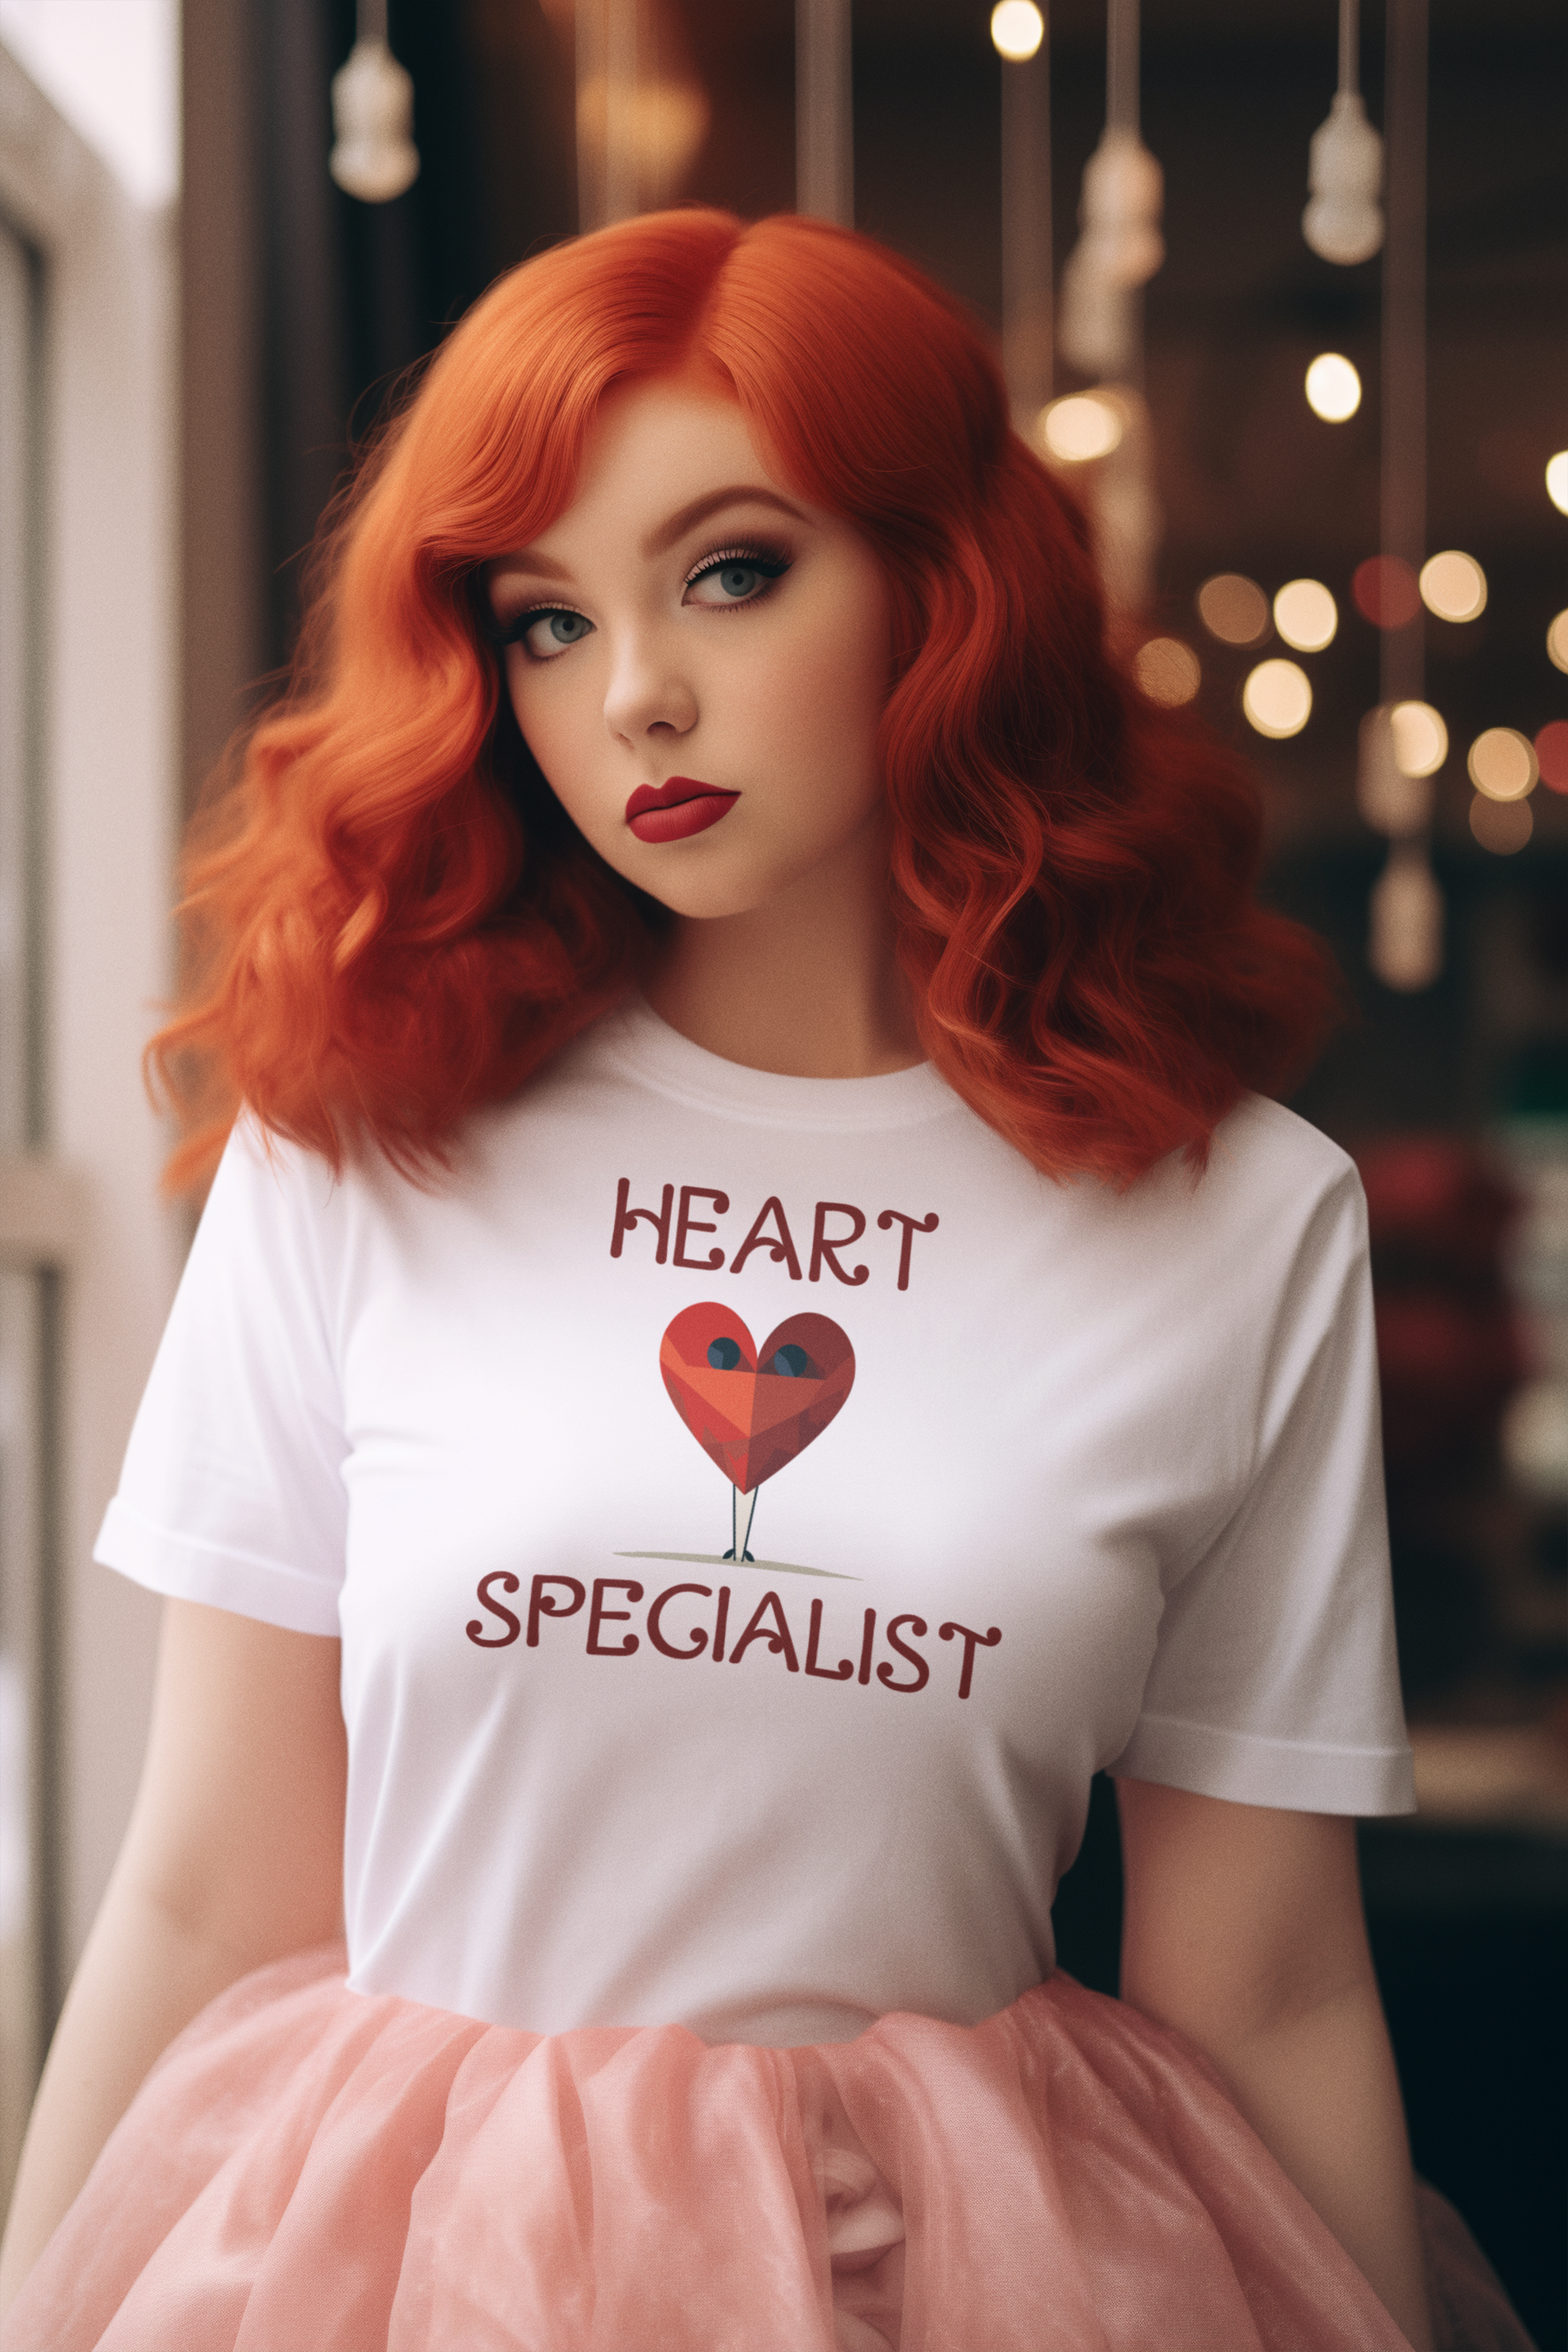 Heart Specialist Women's T-Shirt for the Heart-Centric Fashionista